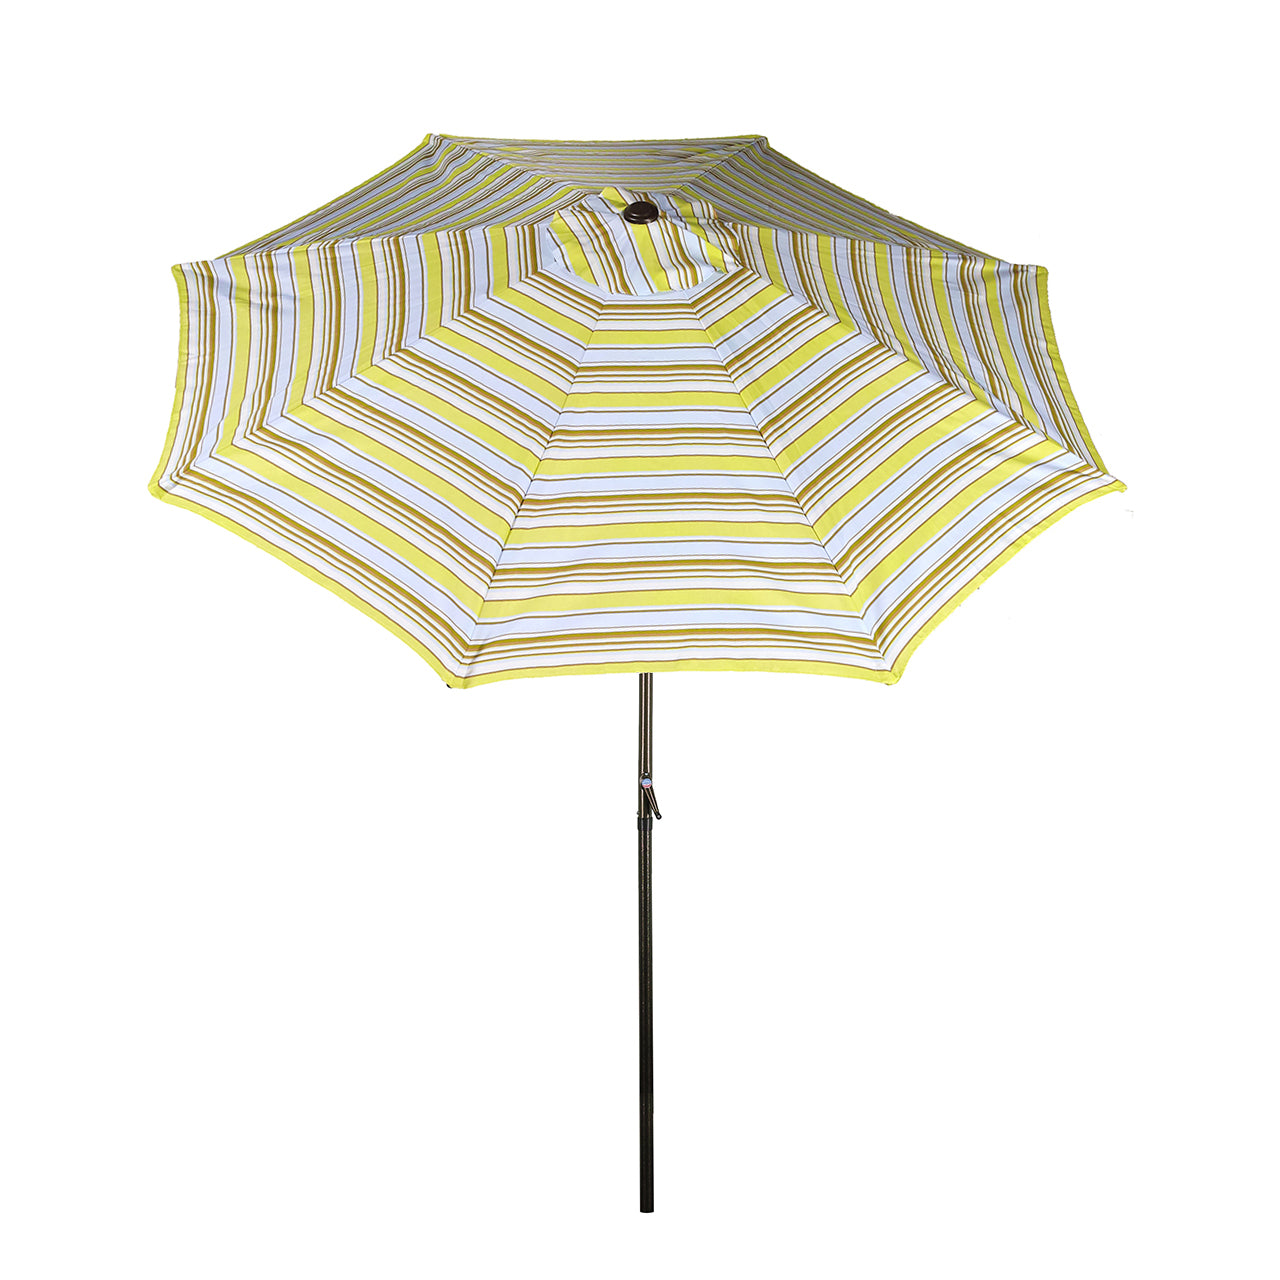 Bliss Outdoors 9-foot Patio Umbrella with Aluminum Pole in the Montauk stripe variation.